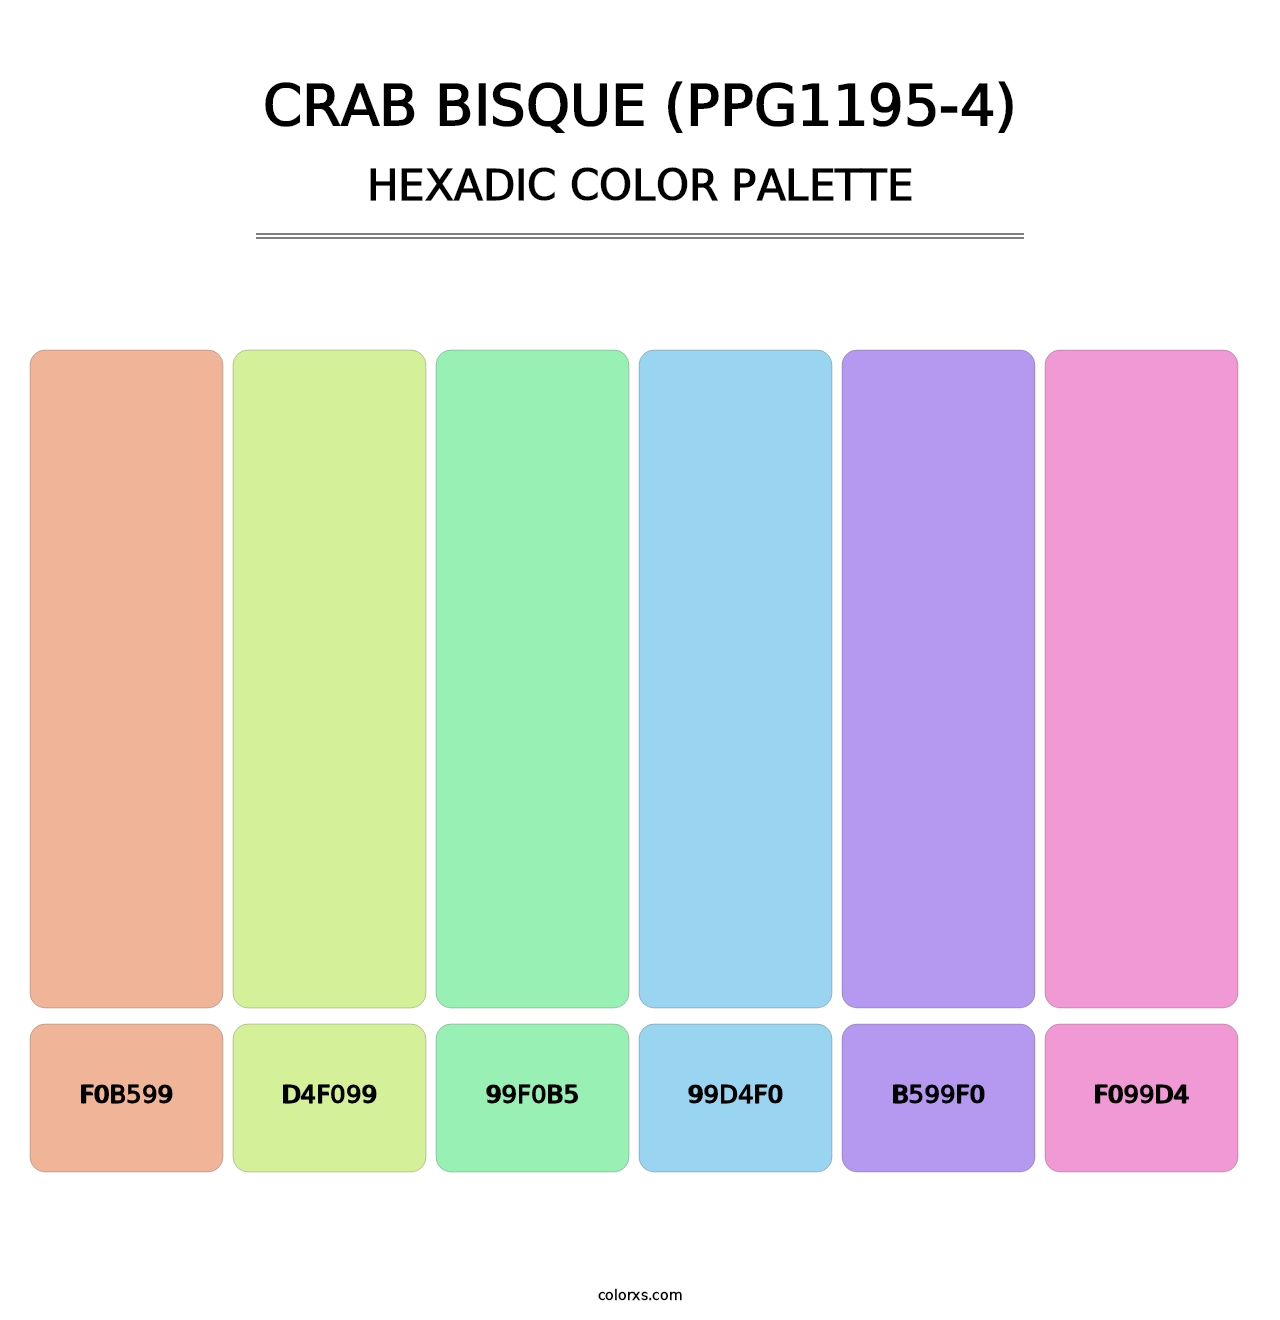 Crab Bisque (PPG1195-4) - Hexadic Color Palette